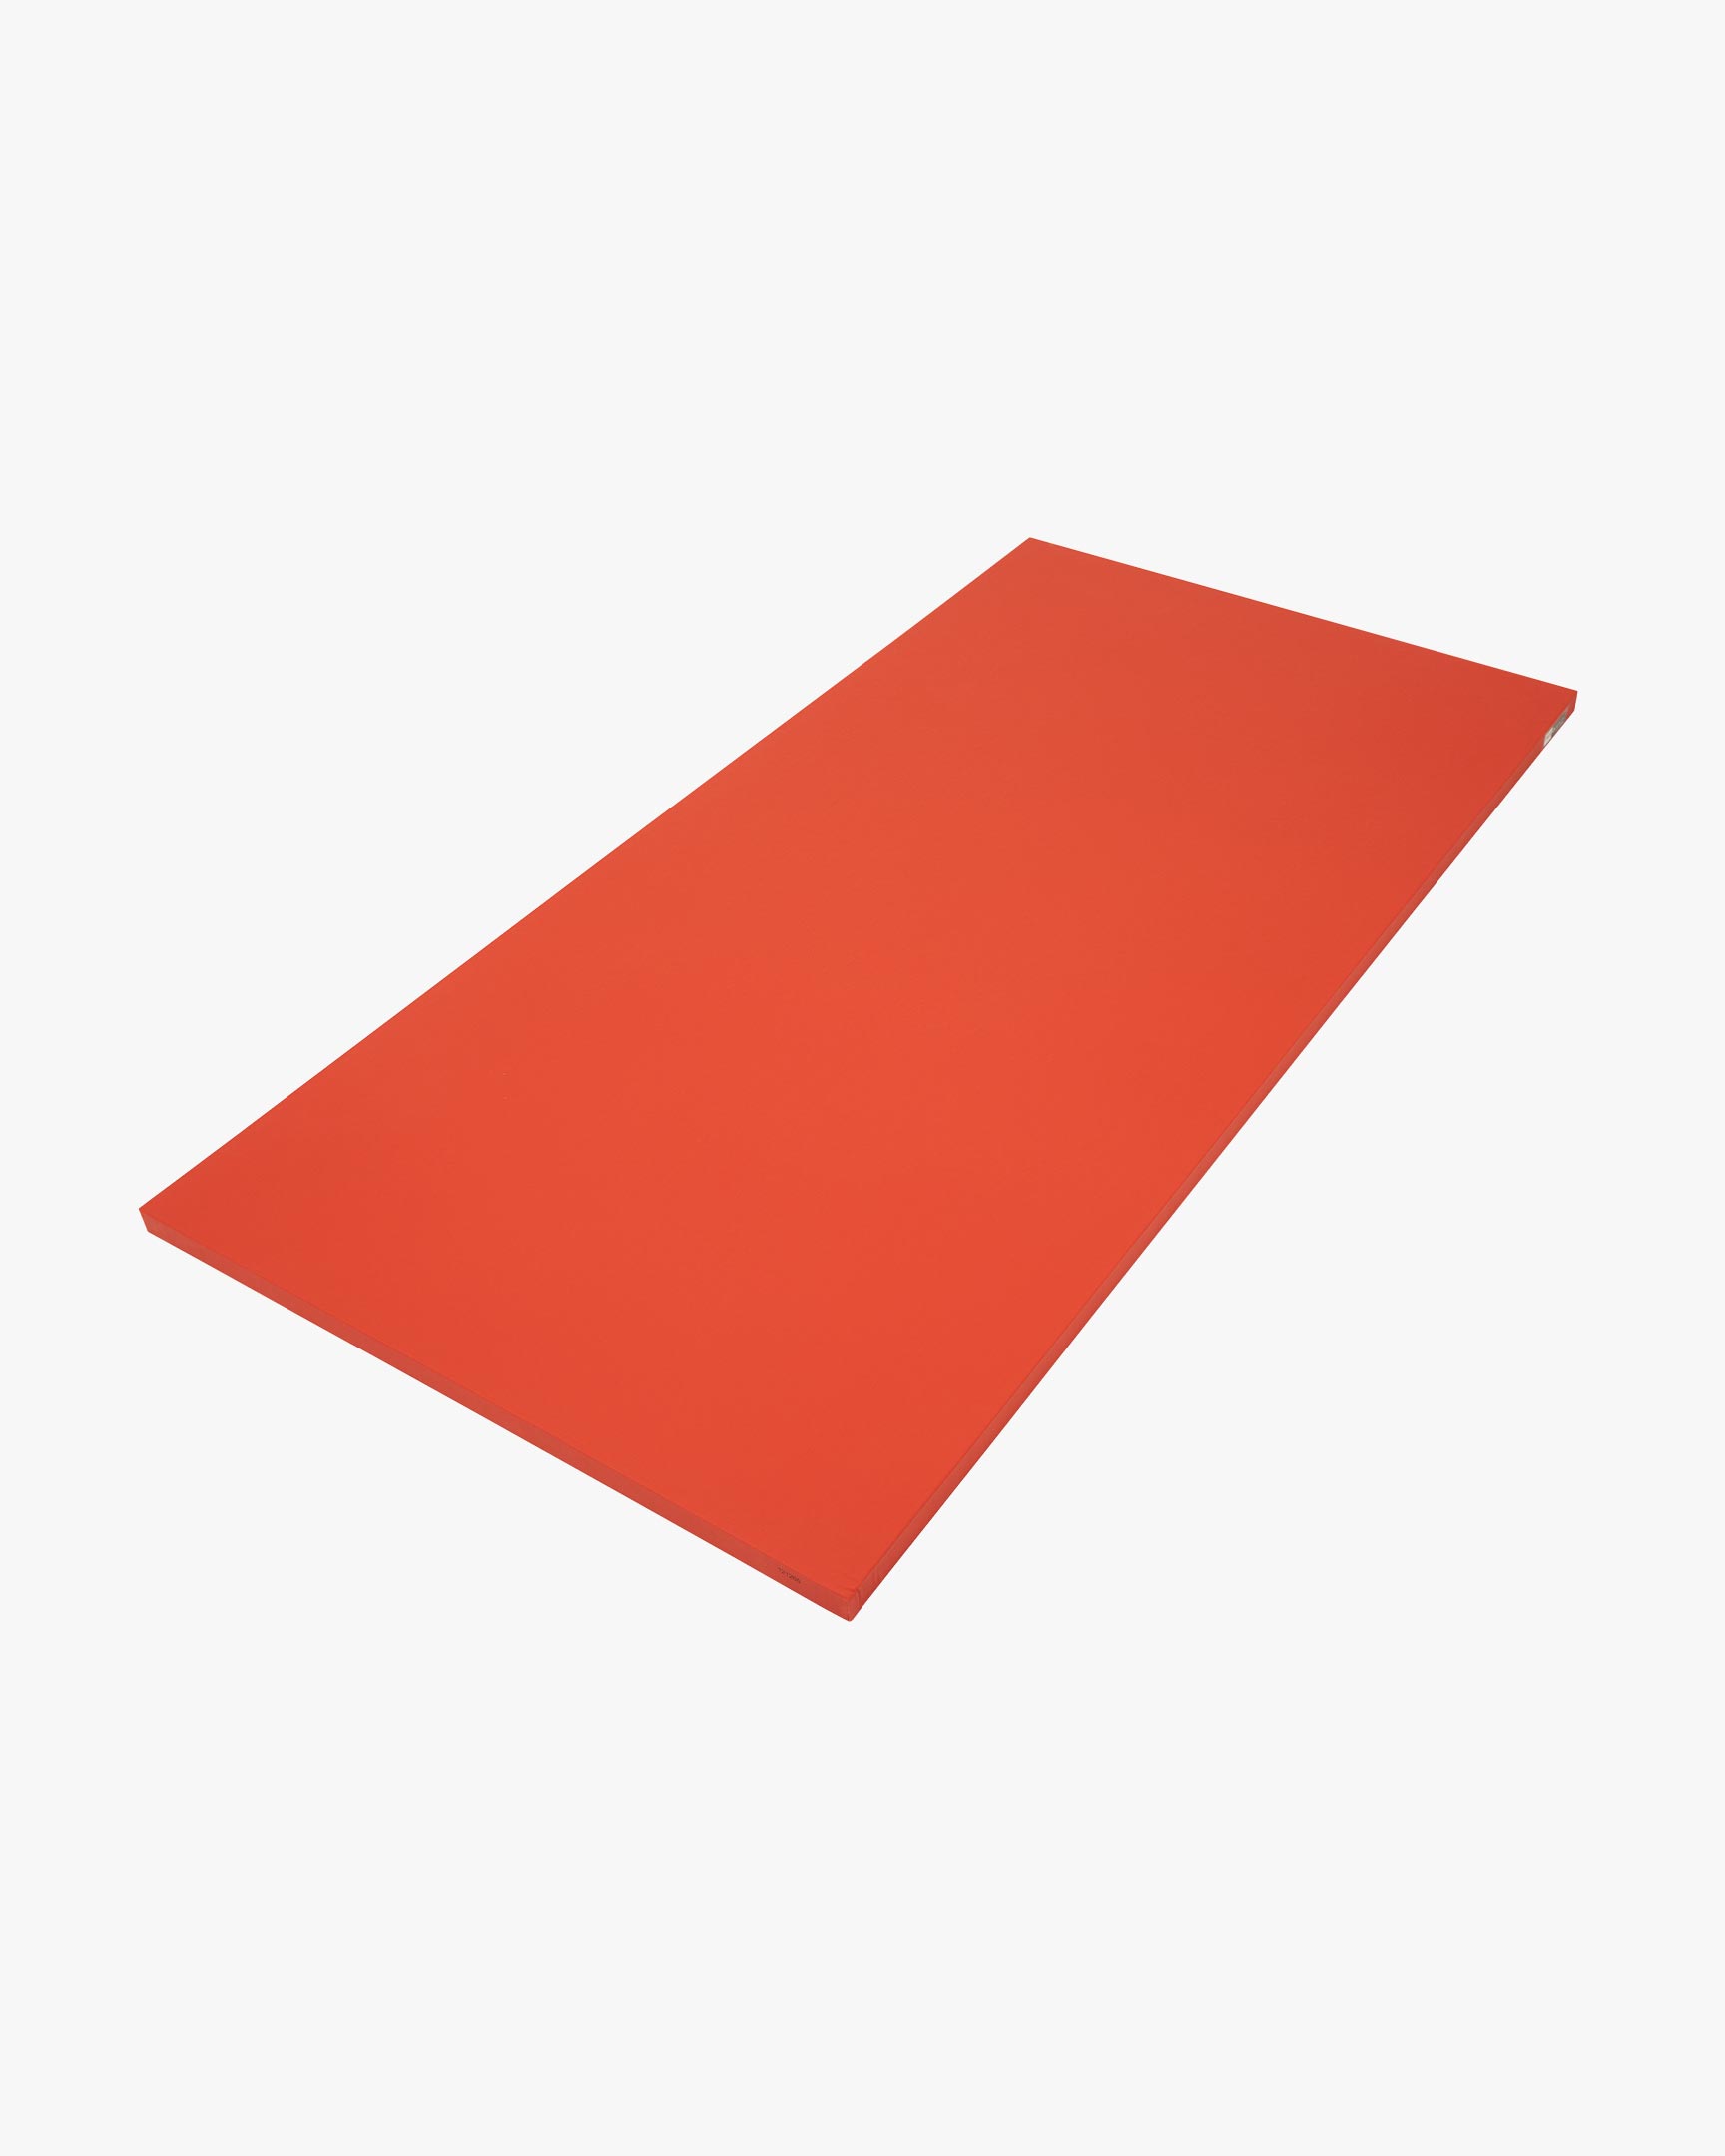 Smooth Tile Mat - 1m x 2m 1.5 Inch Red